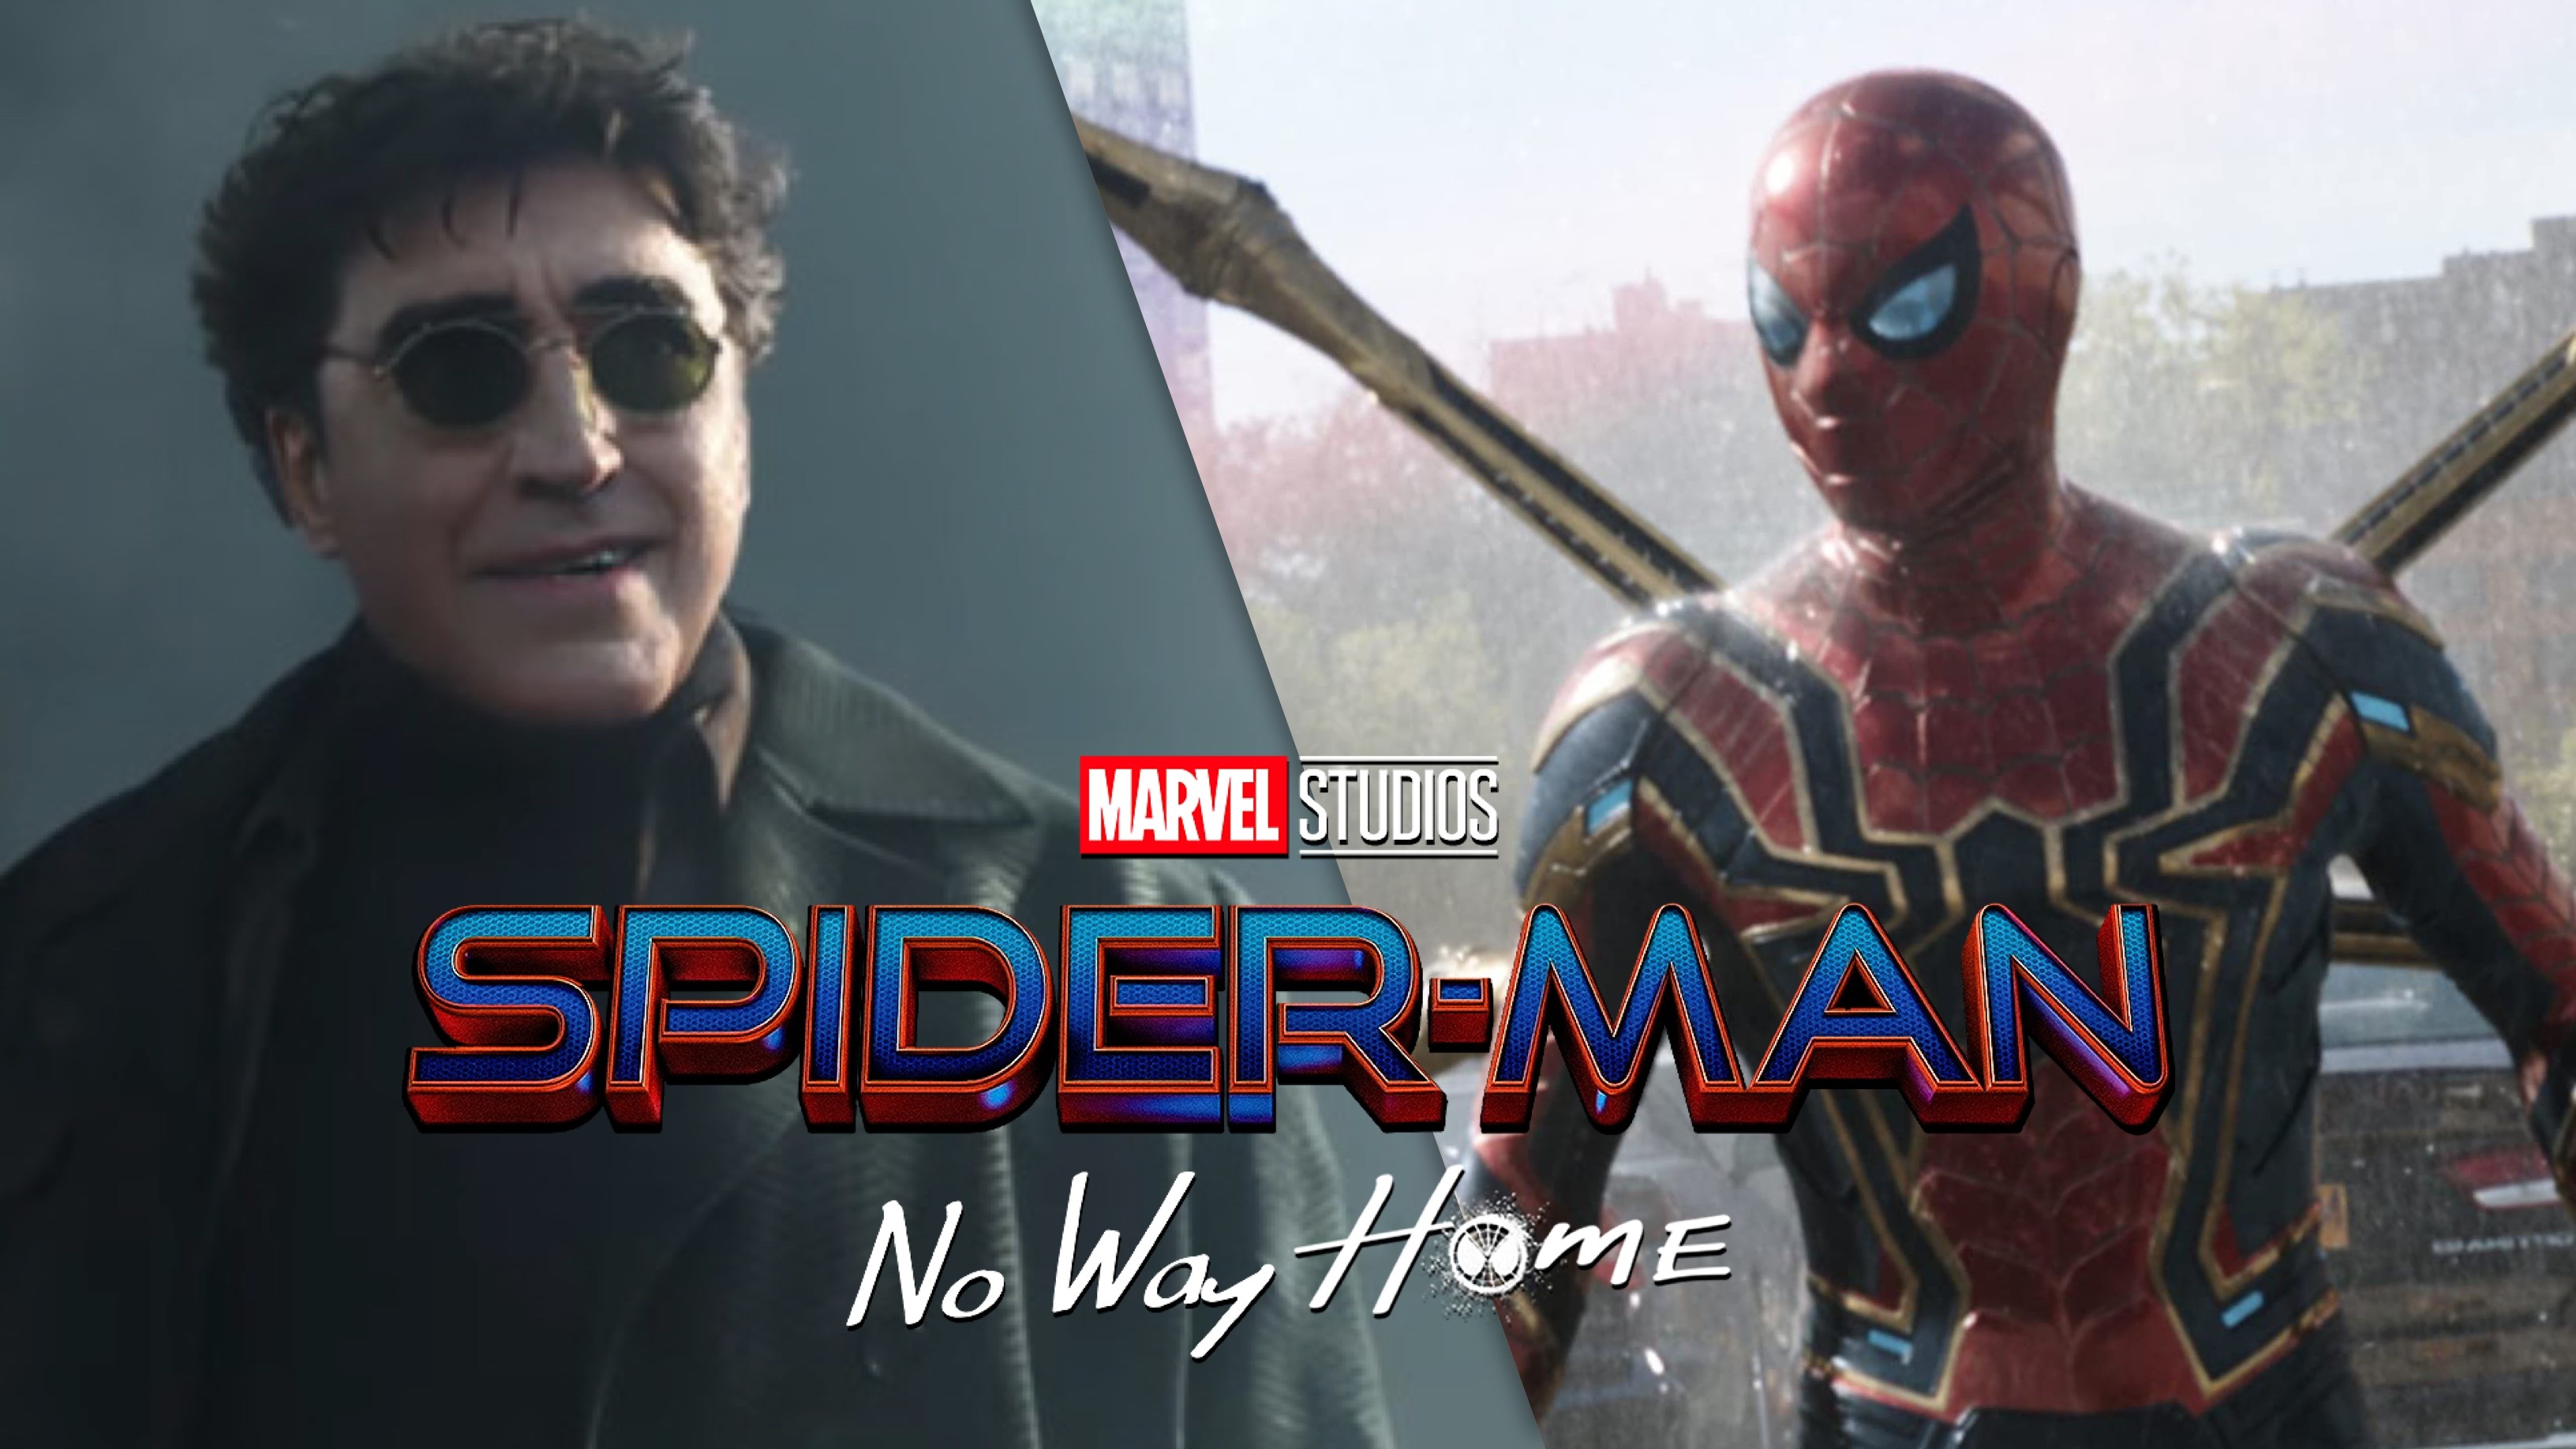 Two New Stills From ‘Spider-Man: No Way Home’ Debut